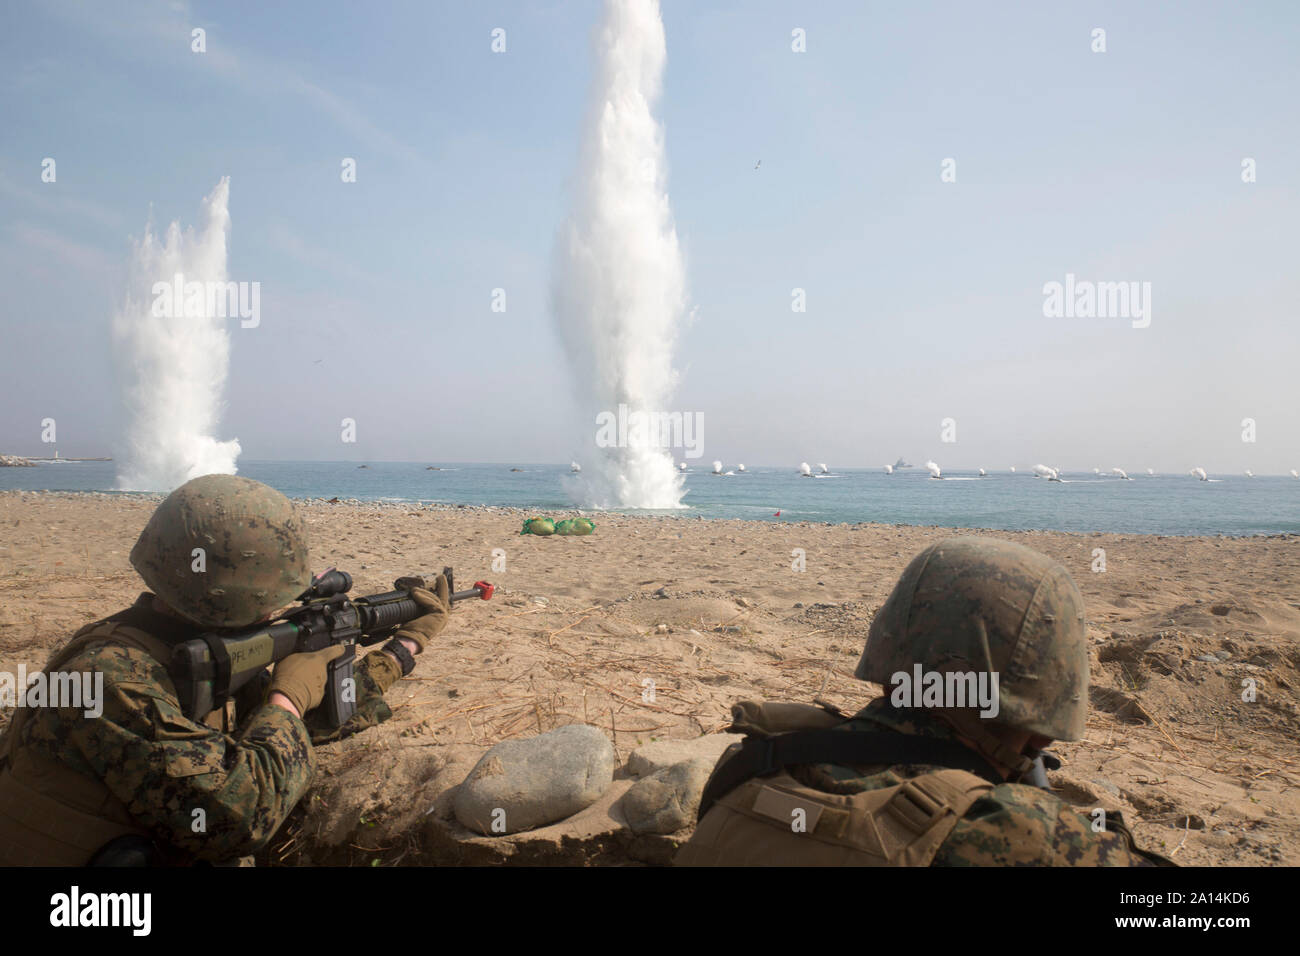 U.S. Marines training on a beach in Pohang, Republic of Korea, as explosive charges detonate. Stock Photo